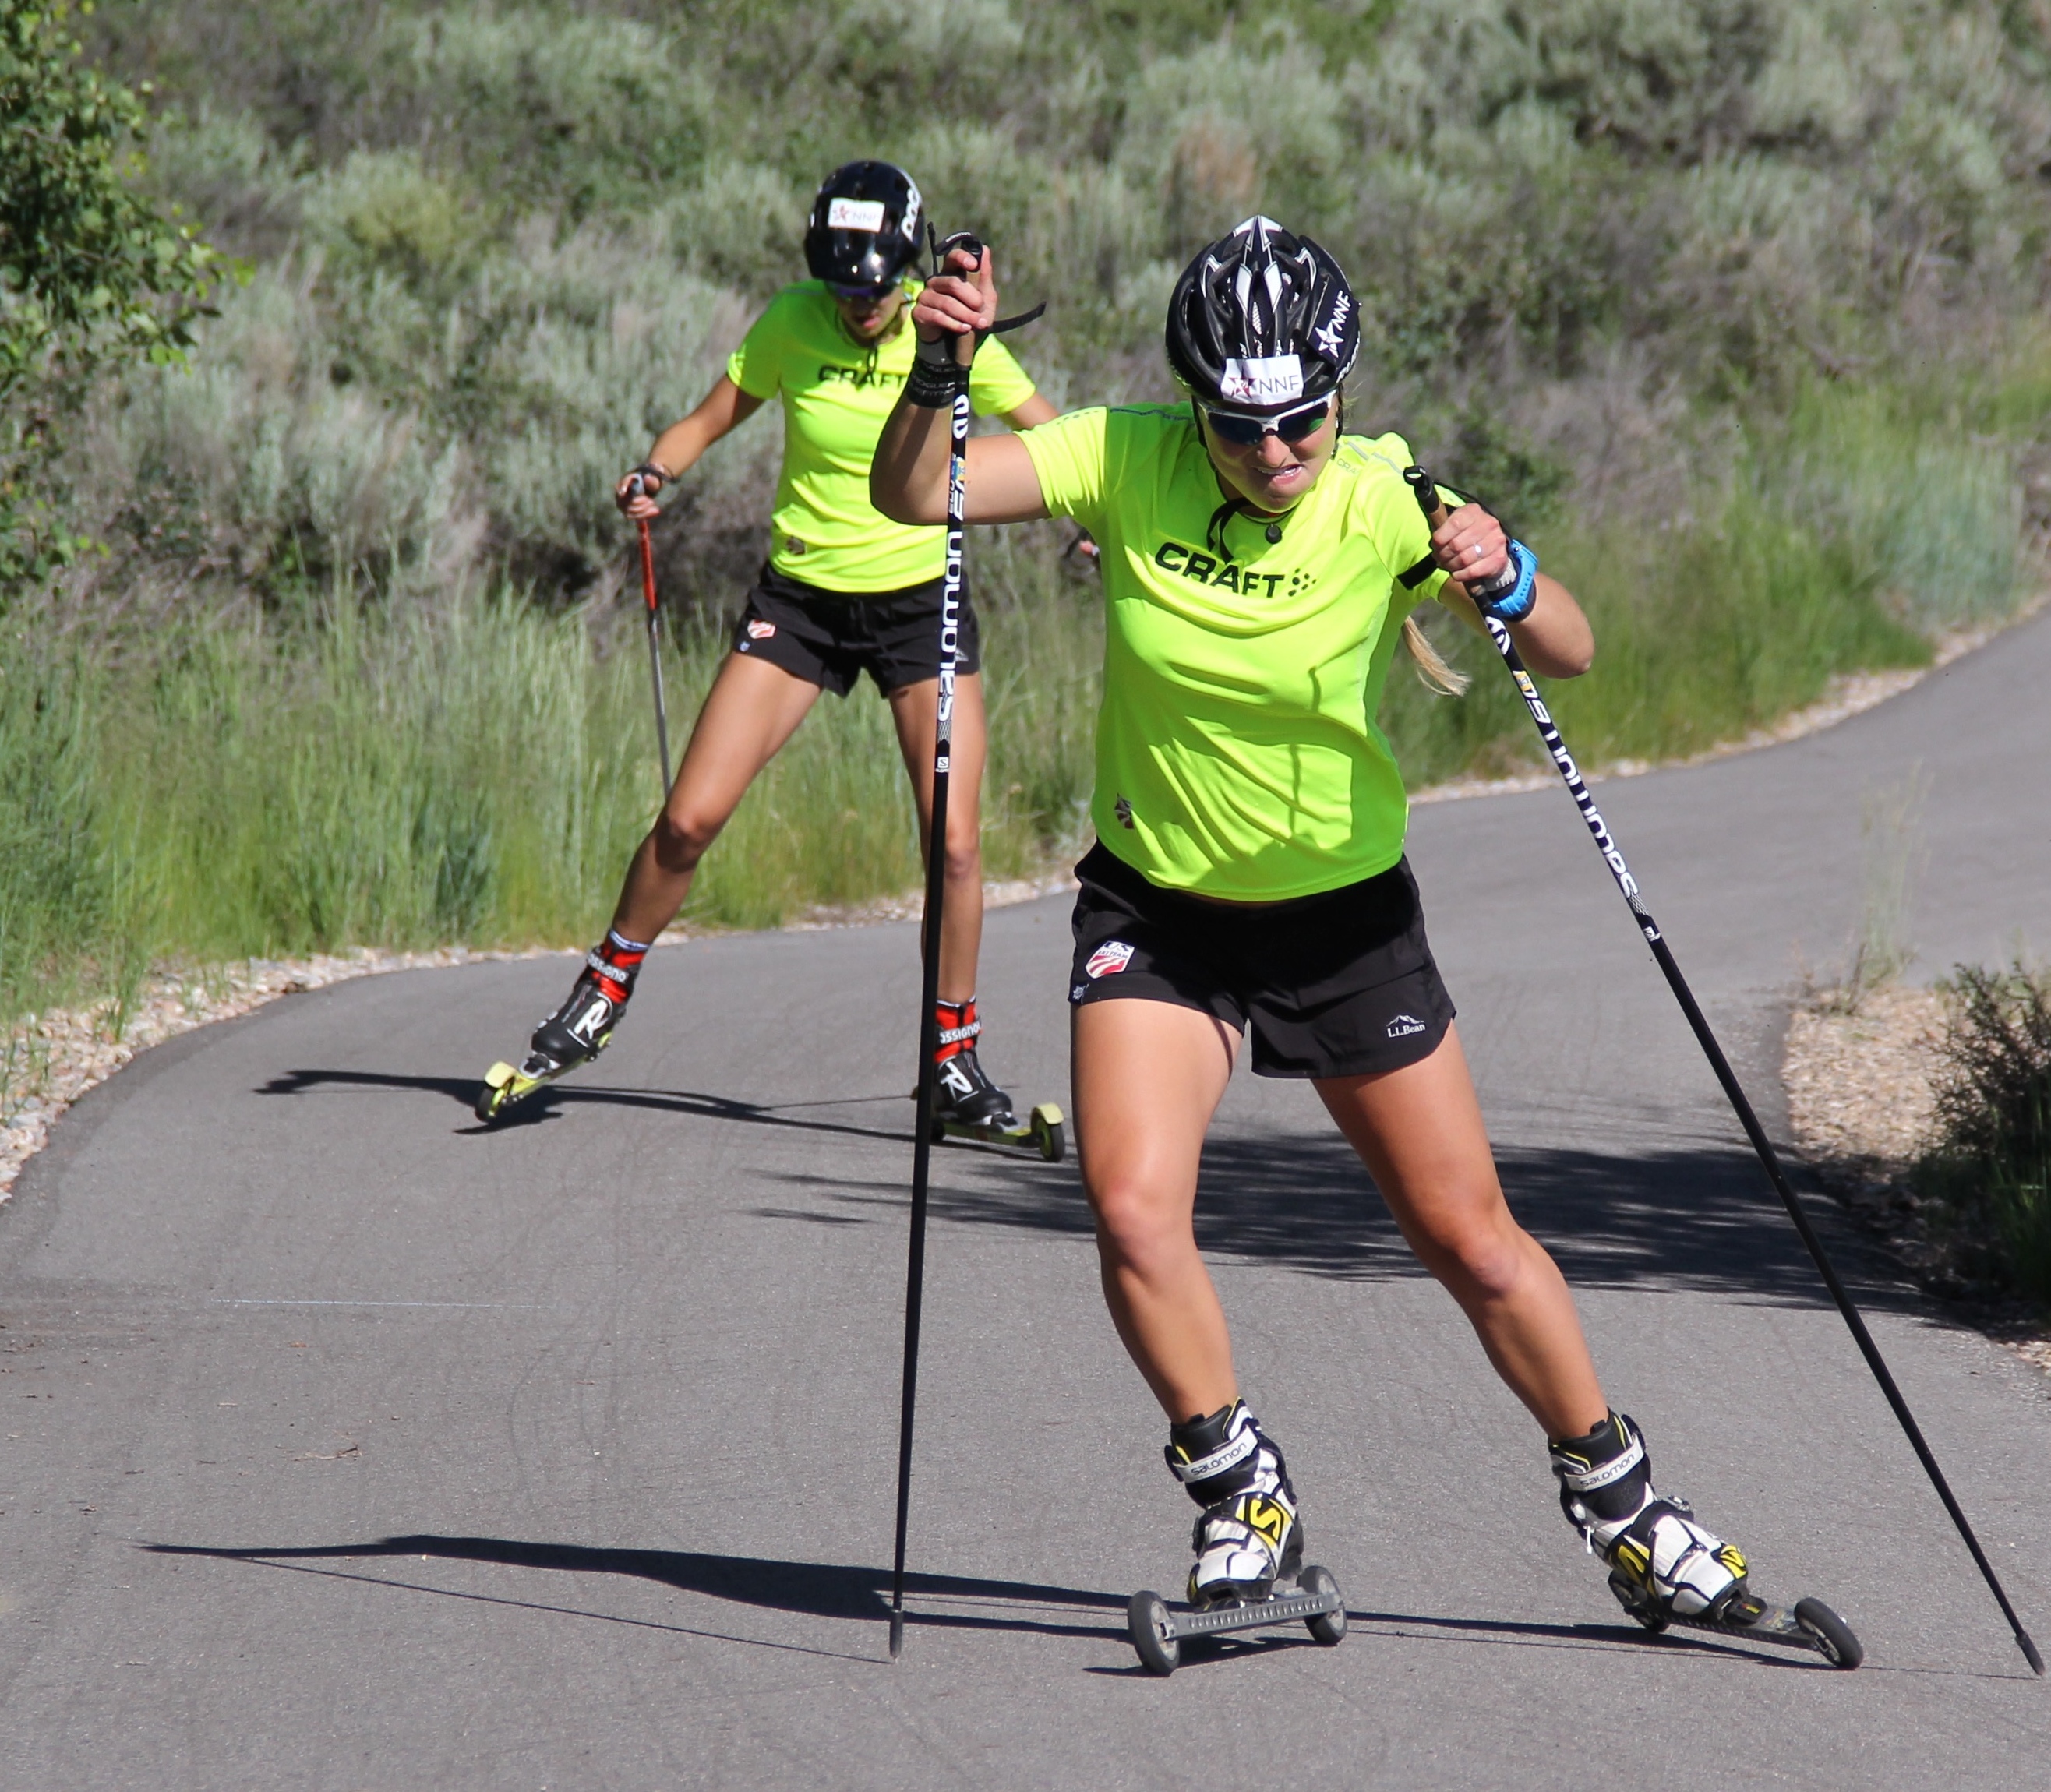 Hannah Halvorsen (foreground) attacking the rollerski track at Soldier Hollow. (Photo: Bryan Fish)